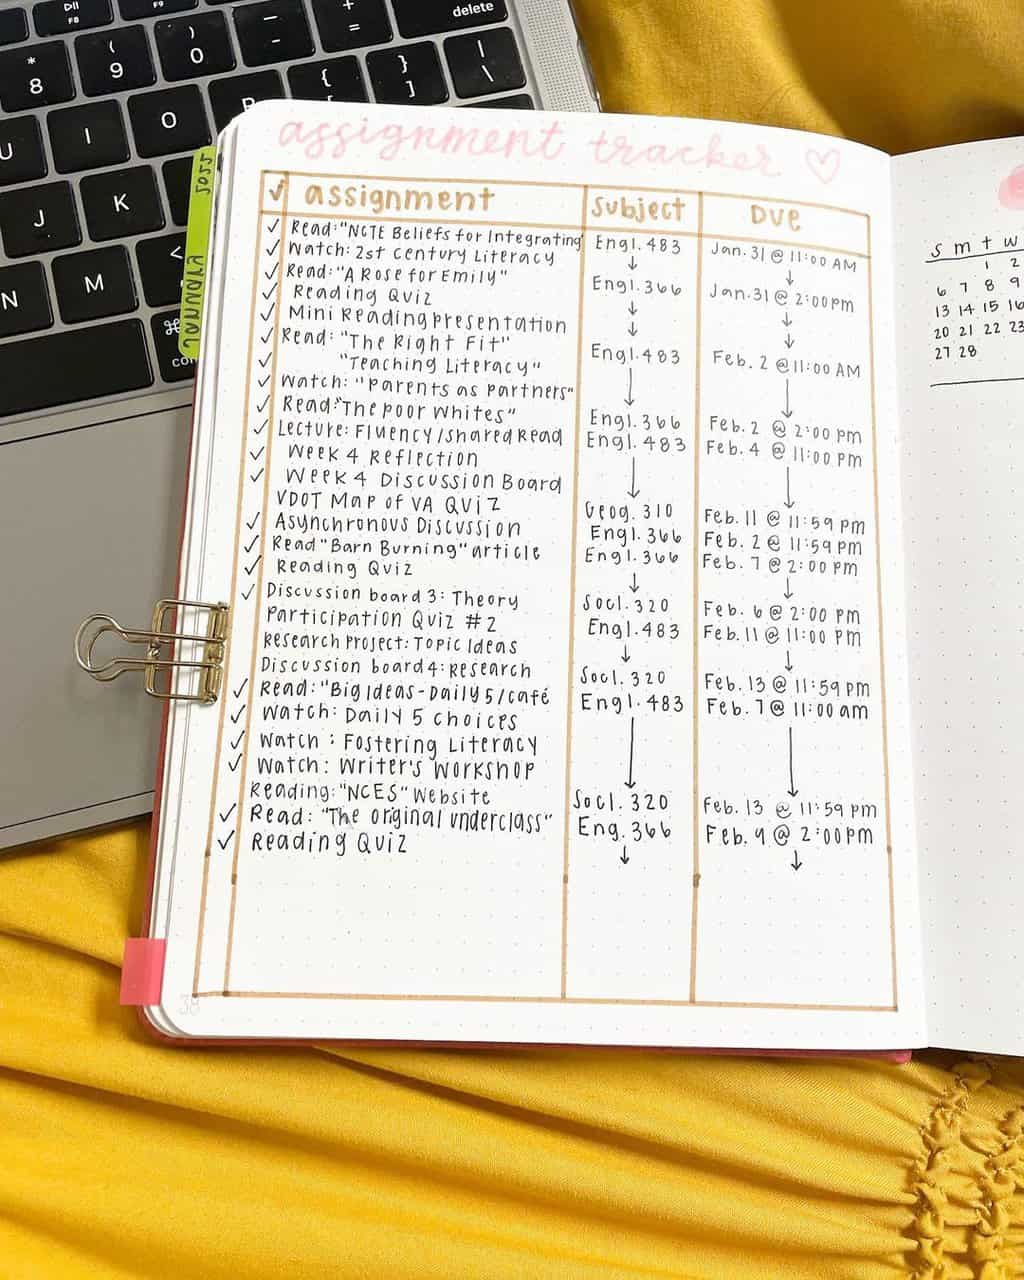 Bullet Journal For School - addignment tracker by @galwithabujo | Masha Plans